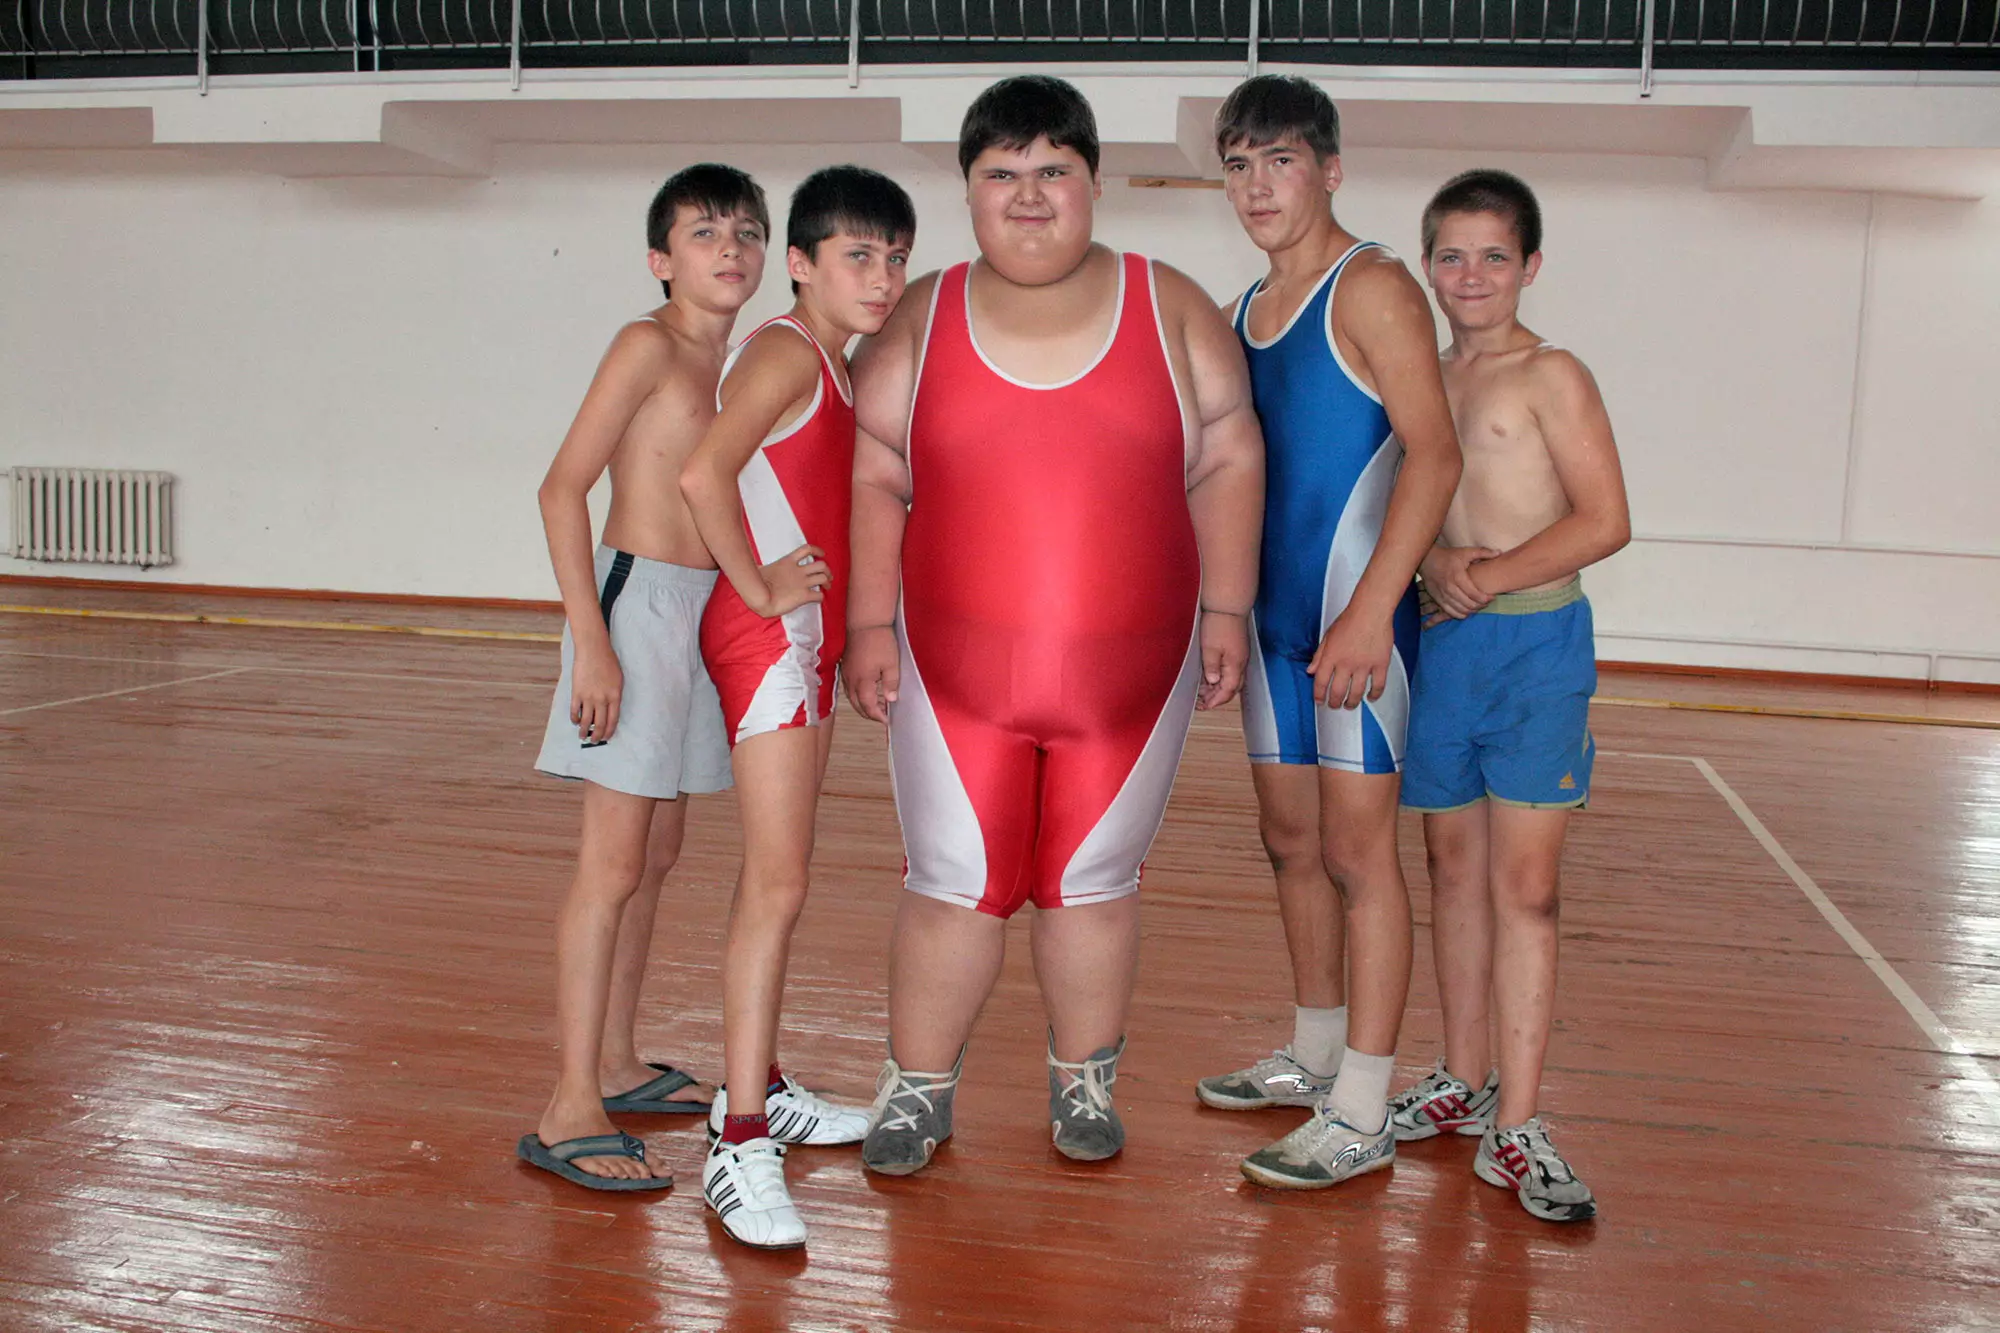 According to the Guinness Book of Records, he is the world's heaviest child since 2003.